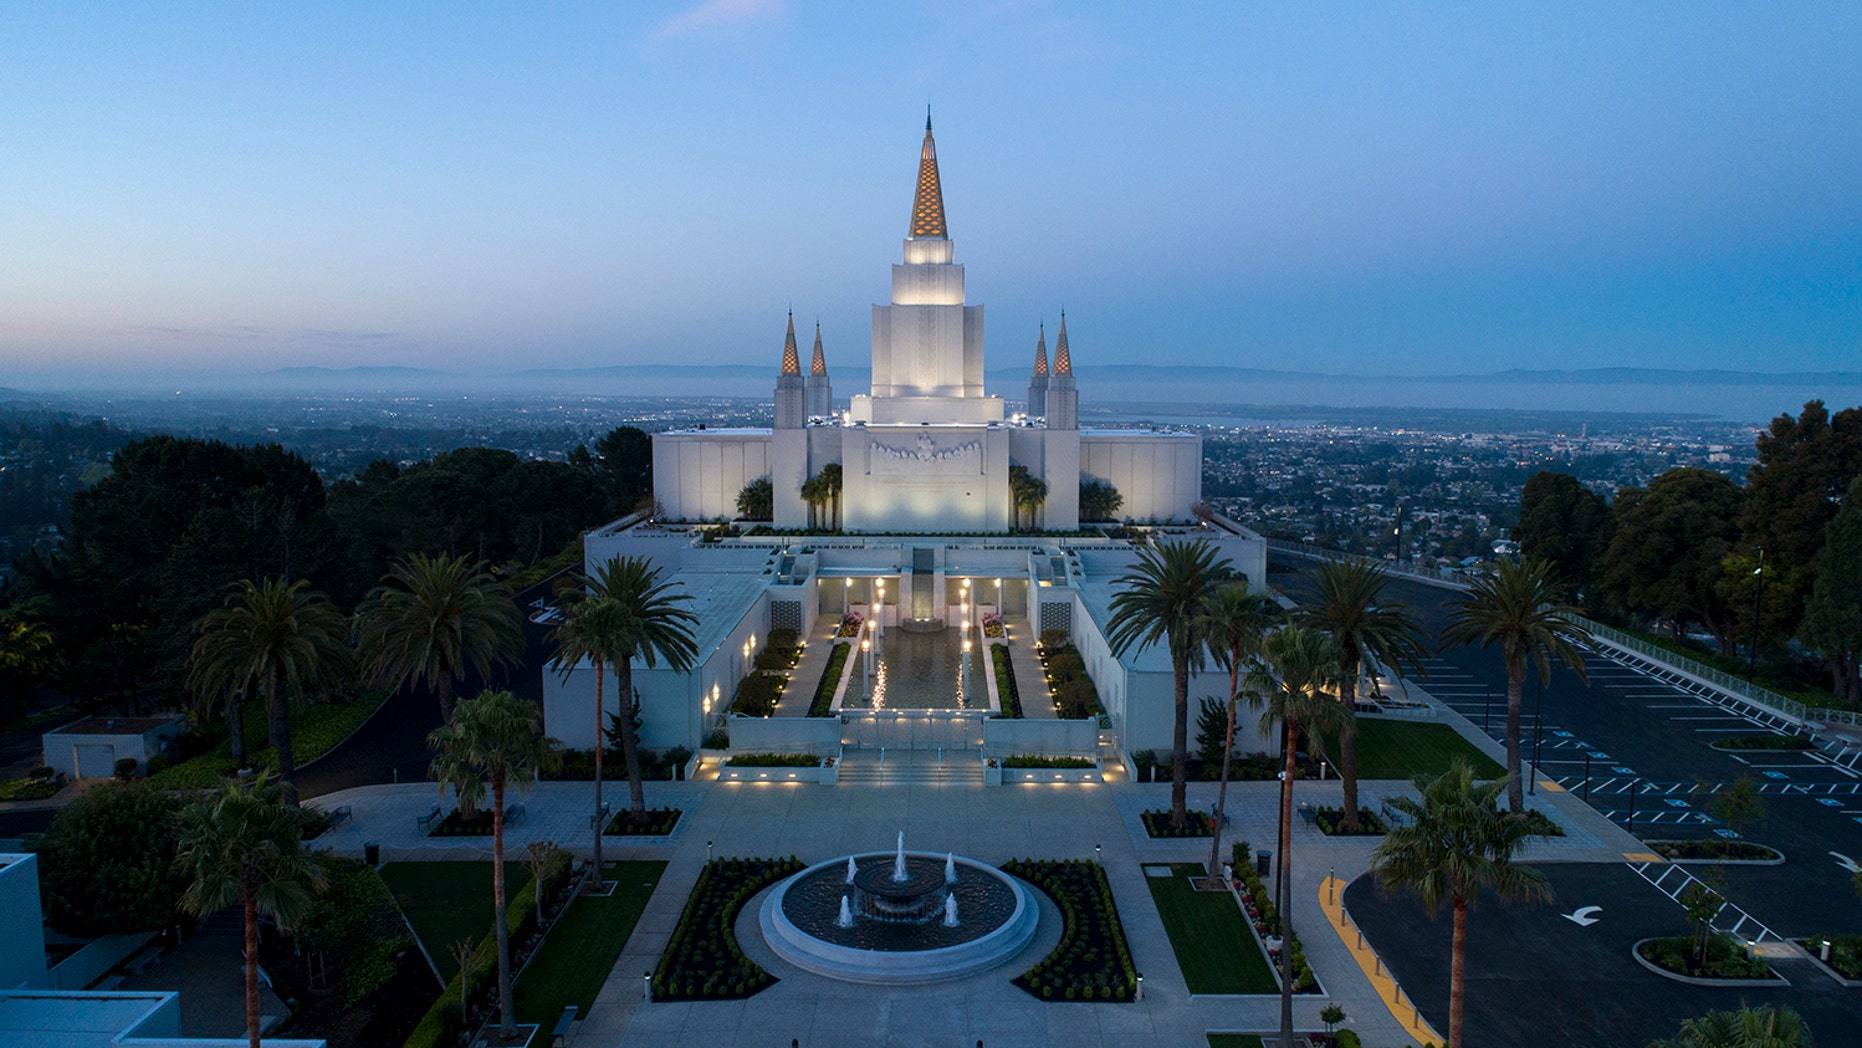 Mormon temple long shrouded in secrecy briefly opens doors to the